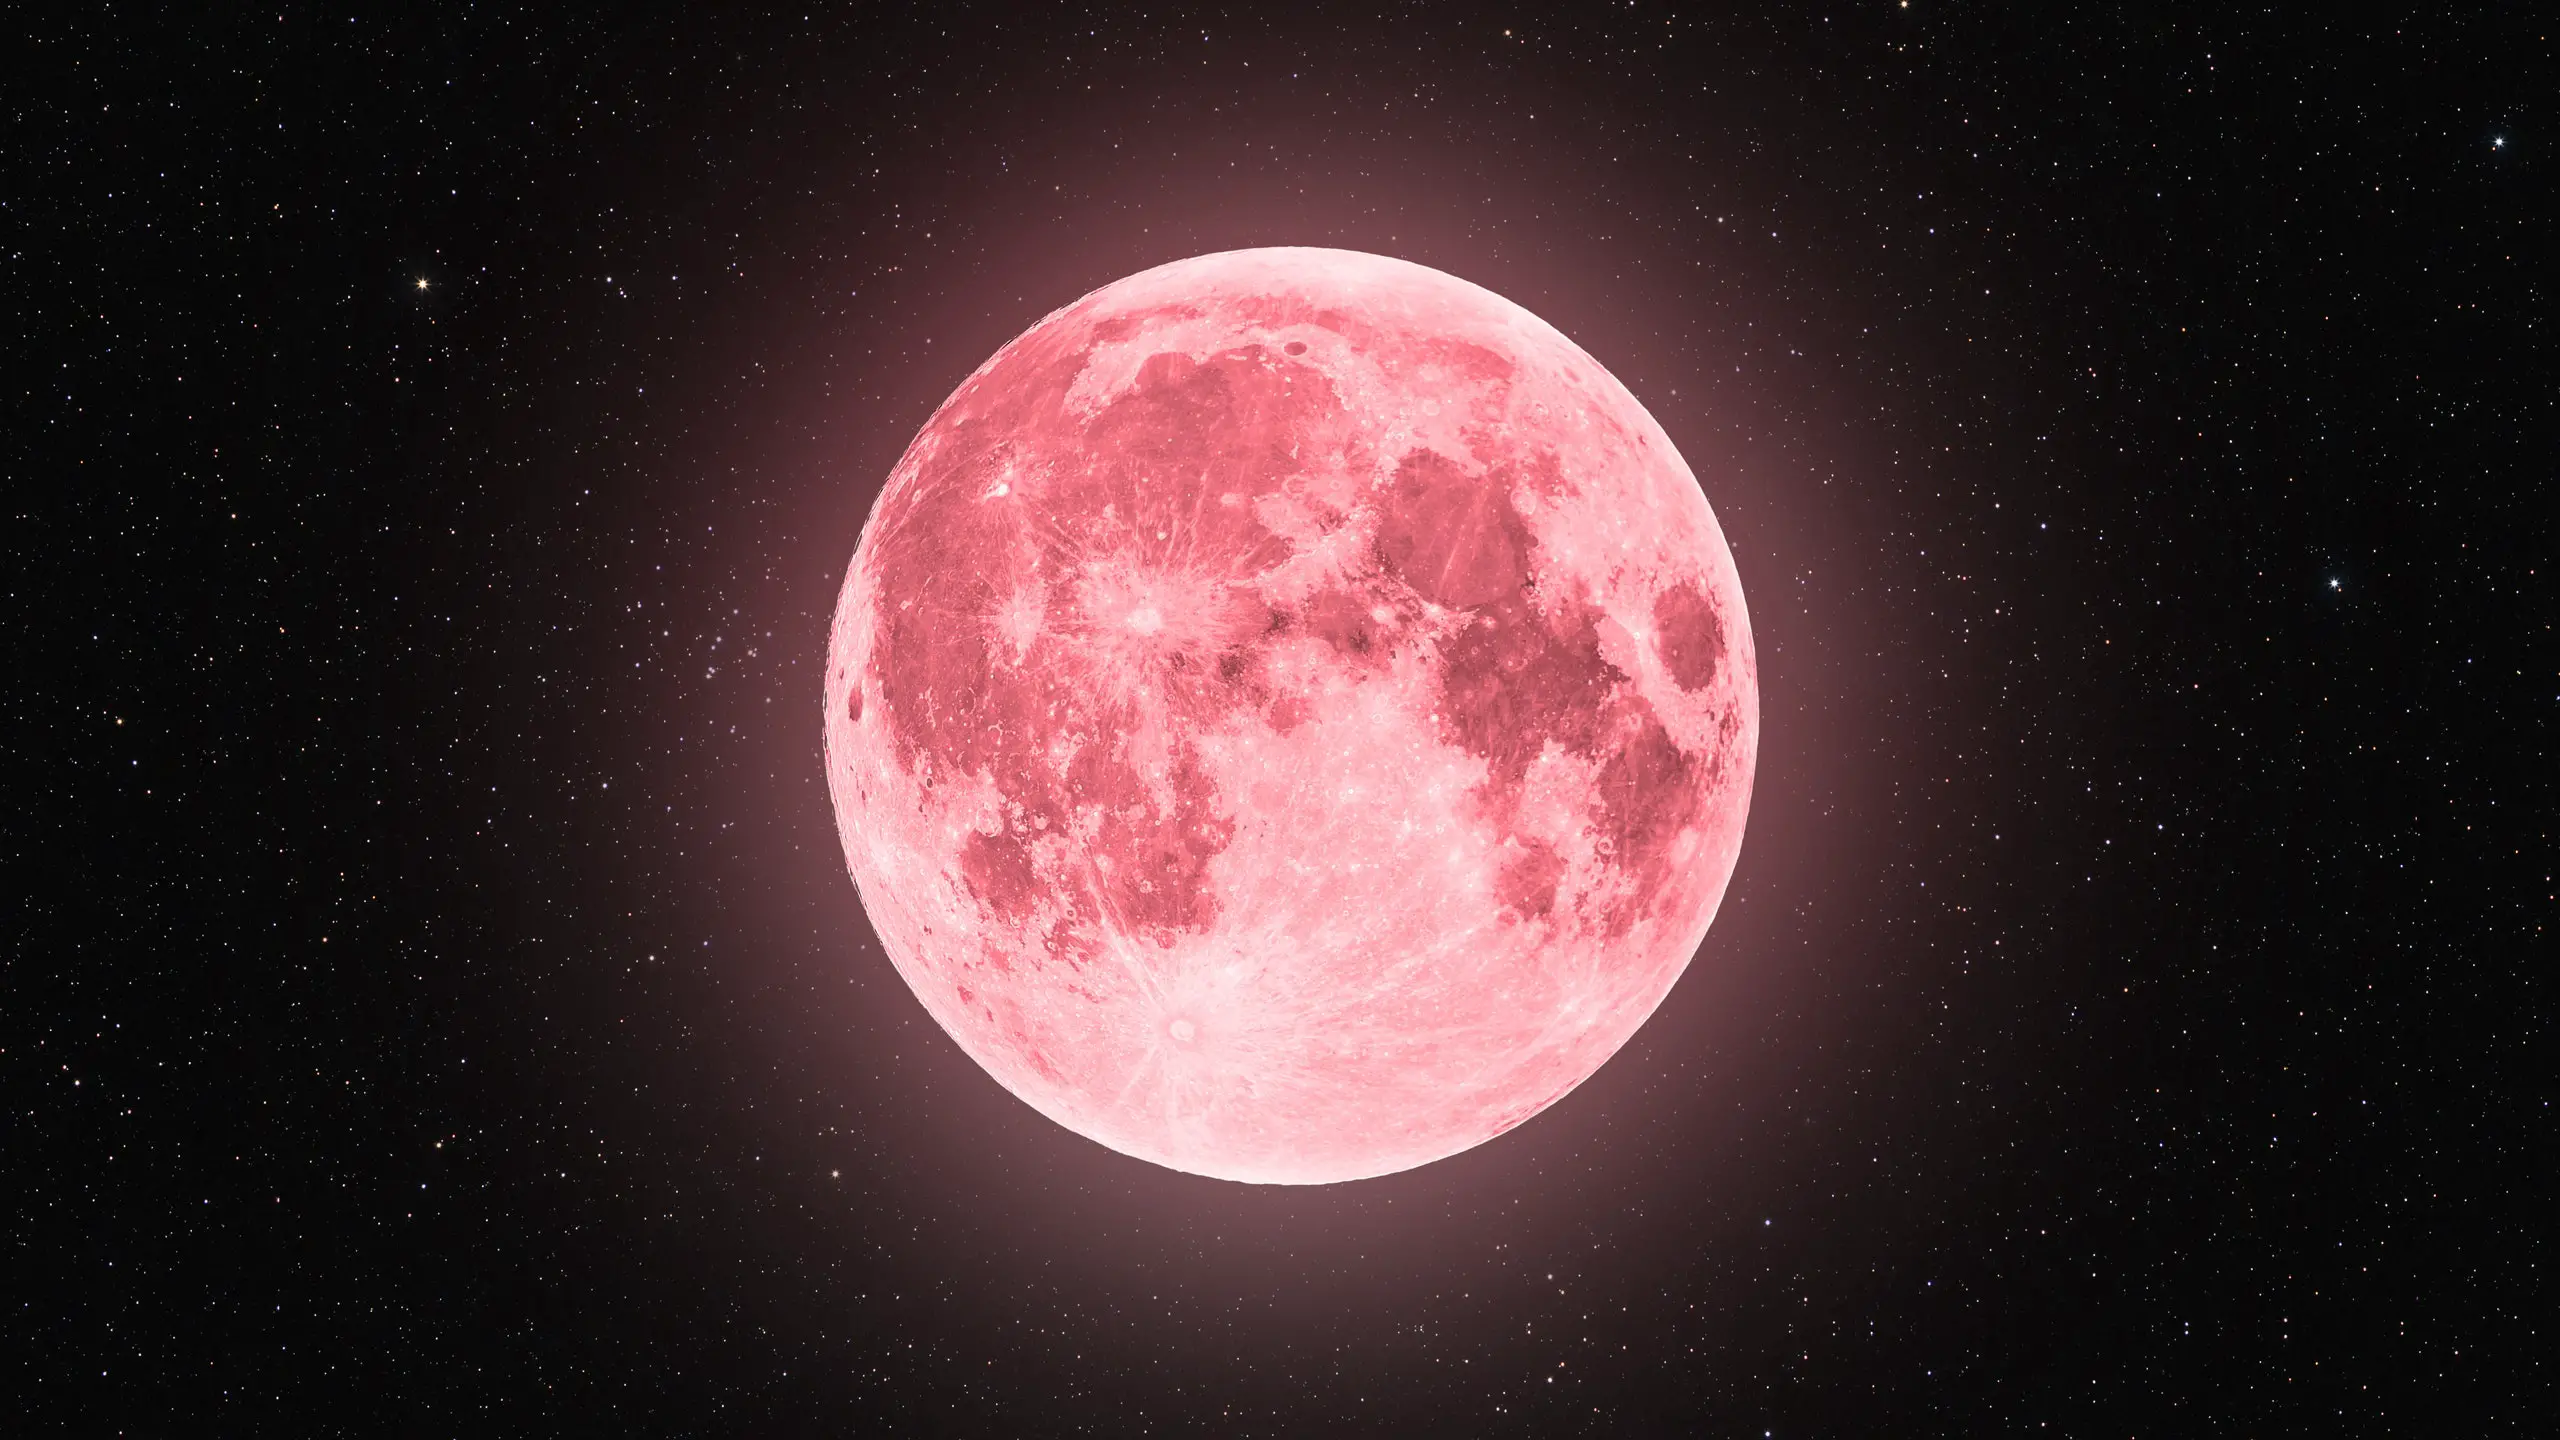 How To Celebrate The Pink Moon?